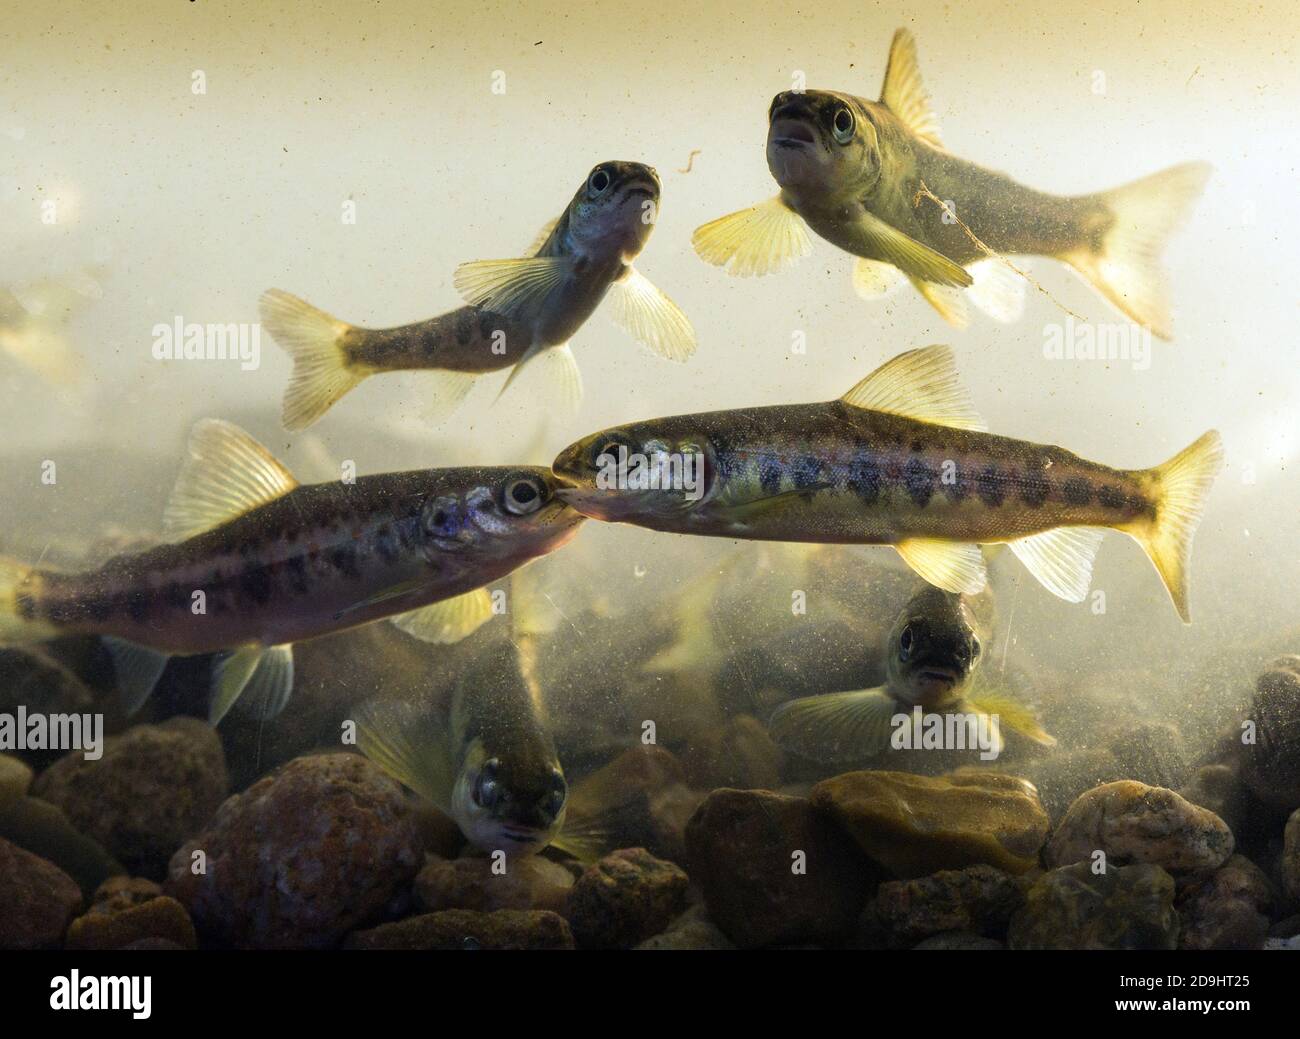 04 November 2020, Brandenburg, Uckerland/Ot Wolfshagen: About six to ten centimetres long young salmon swim in a glass container before being released into the river Stepenitz. In total, around 50,000 six-month-old salmon bred at the Denmark Center for Vildlaks for Brandenburg were released in the river's catchment area. The fish are released in autumn to get used to the water, feed on small crabs and insect larvae, migrate towards the open sea in spring and return to their Brandenburg home after two to three years. The Institute for Inland Fisheries e.V., which is based in Potsdam-Sacrow (IFB Stock Photo